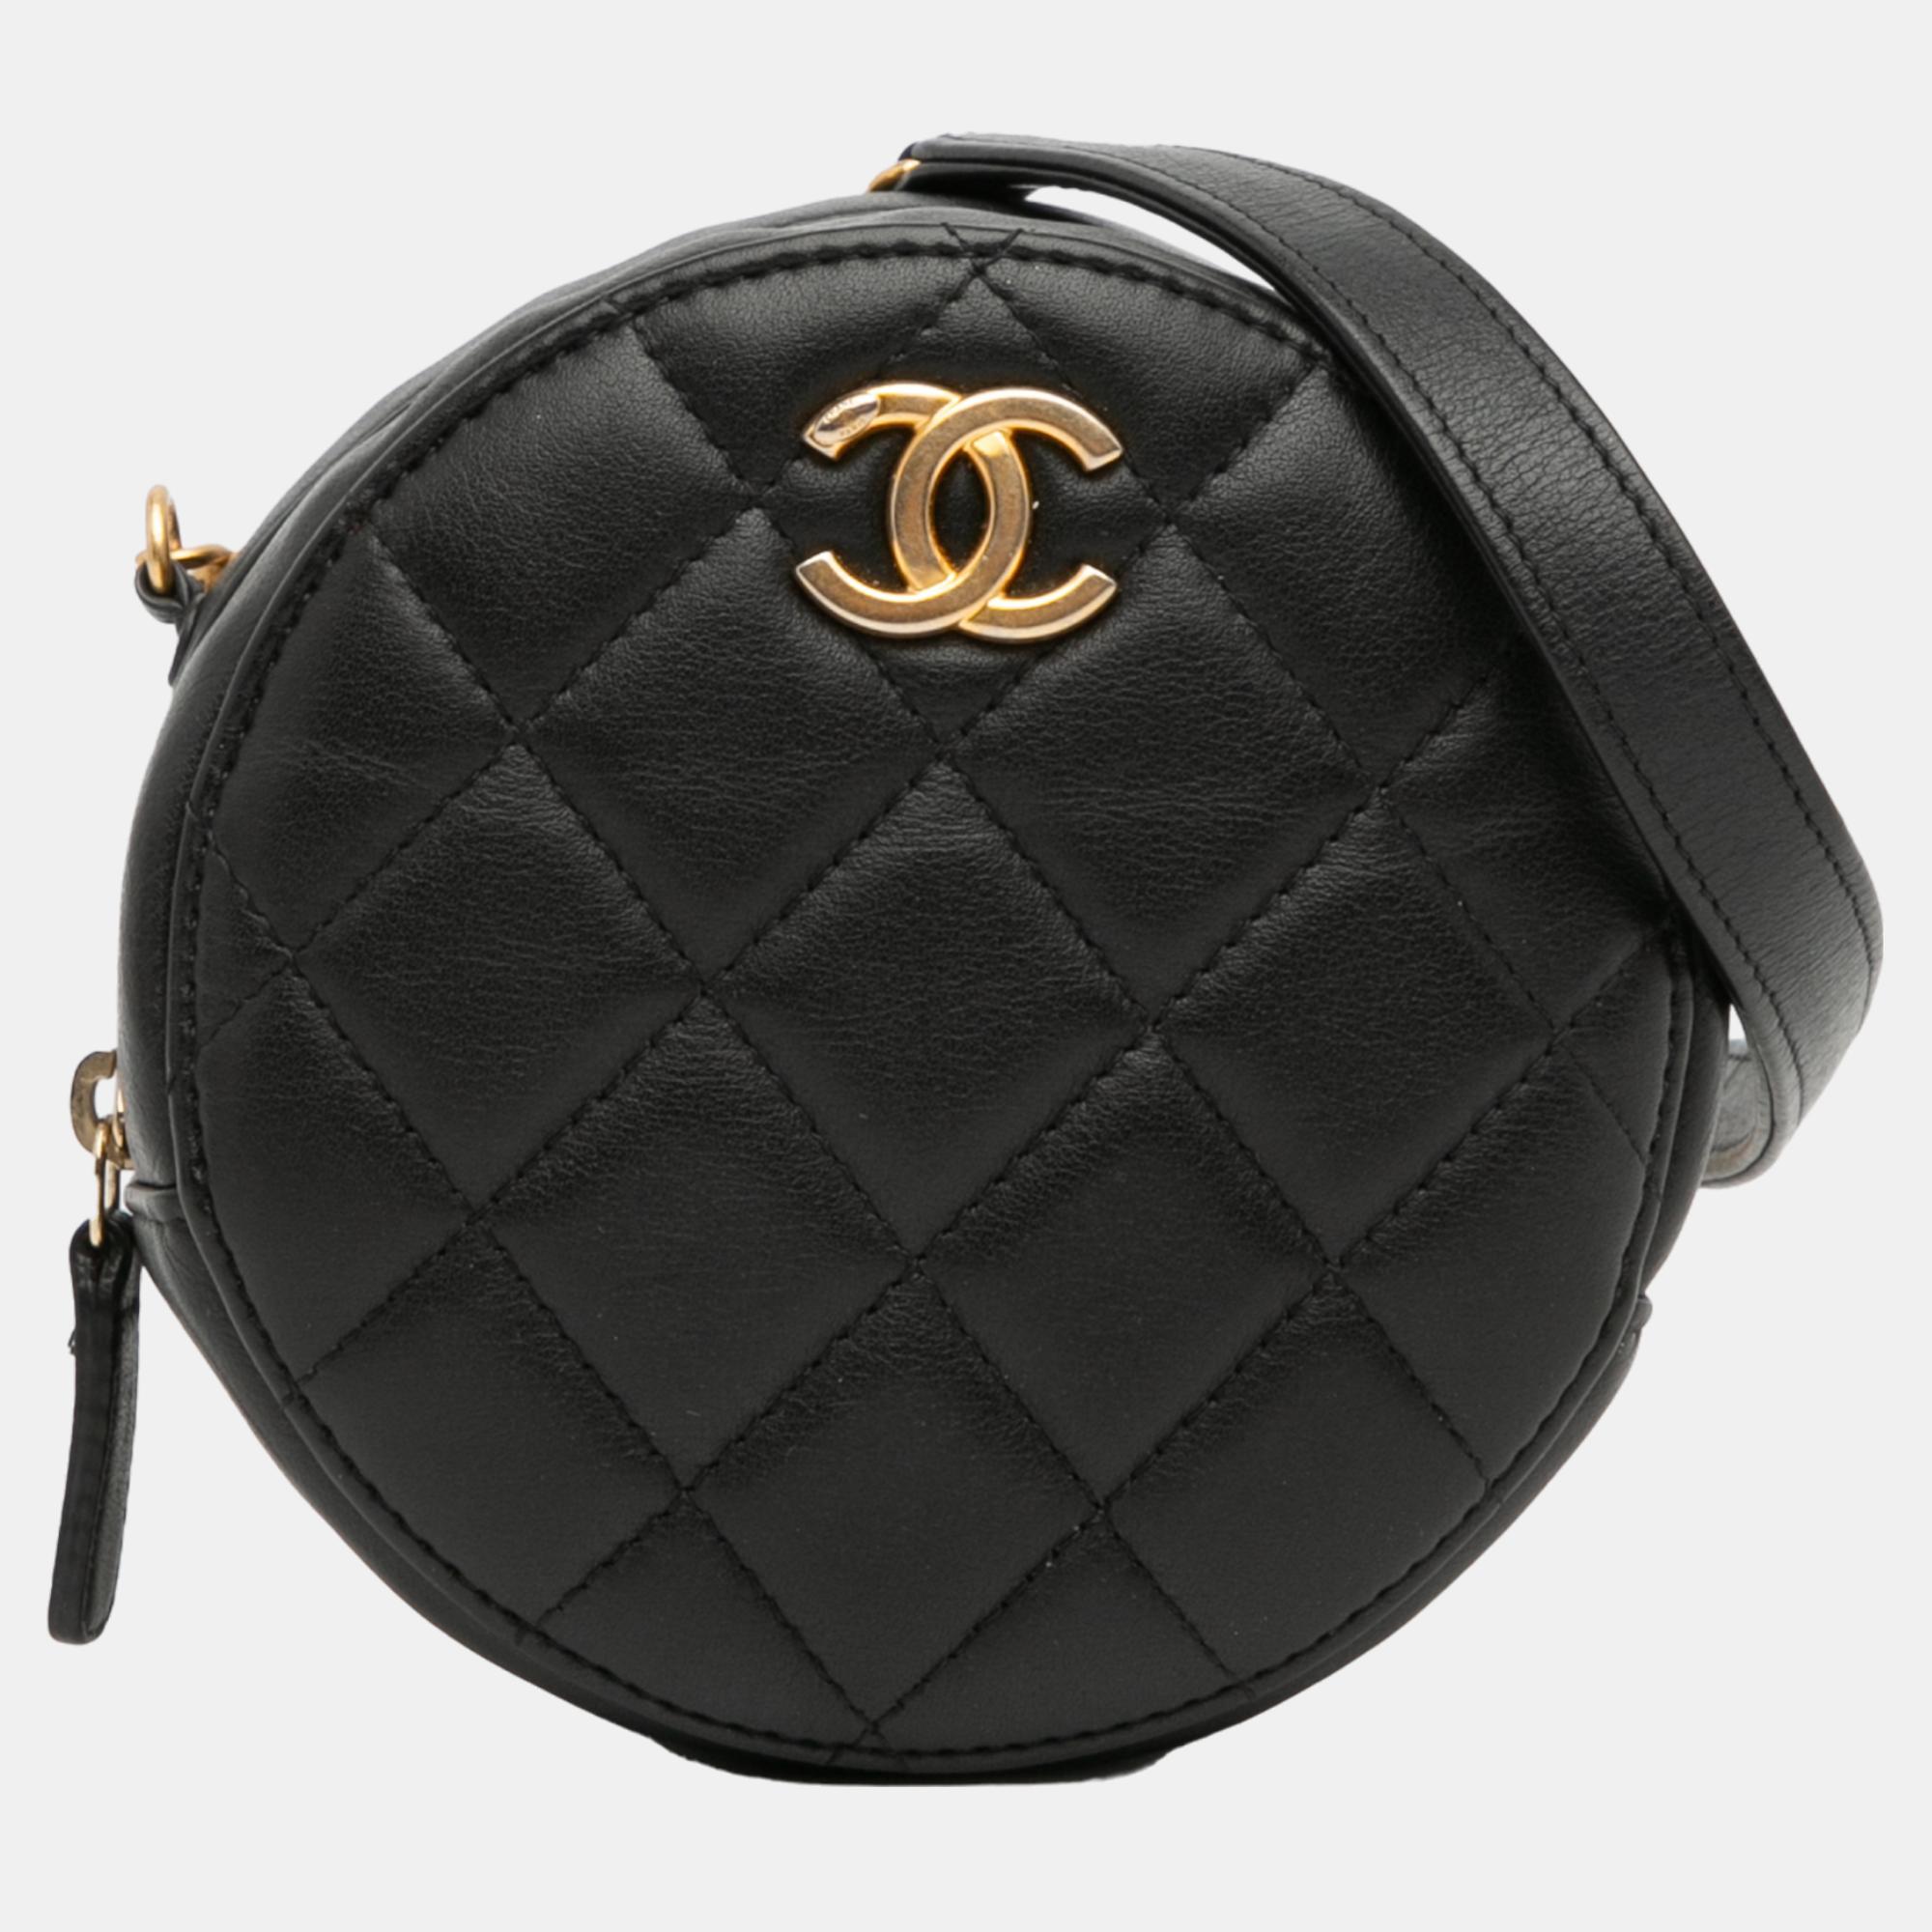 Chanel black quilted calfskin about pearls round clutch with chain